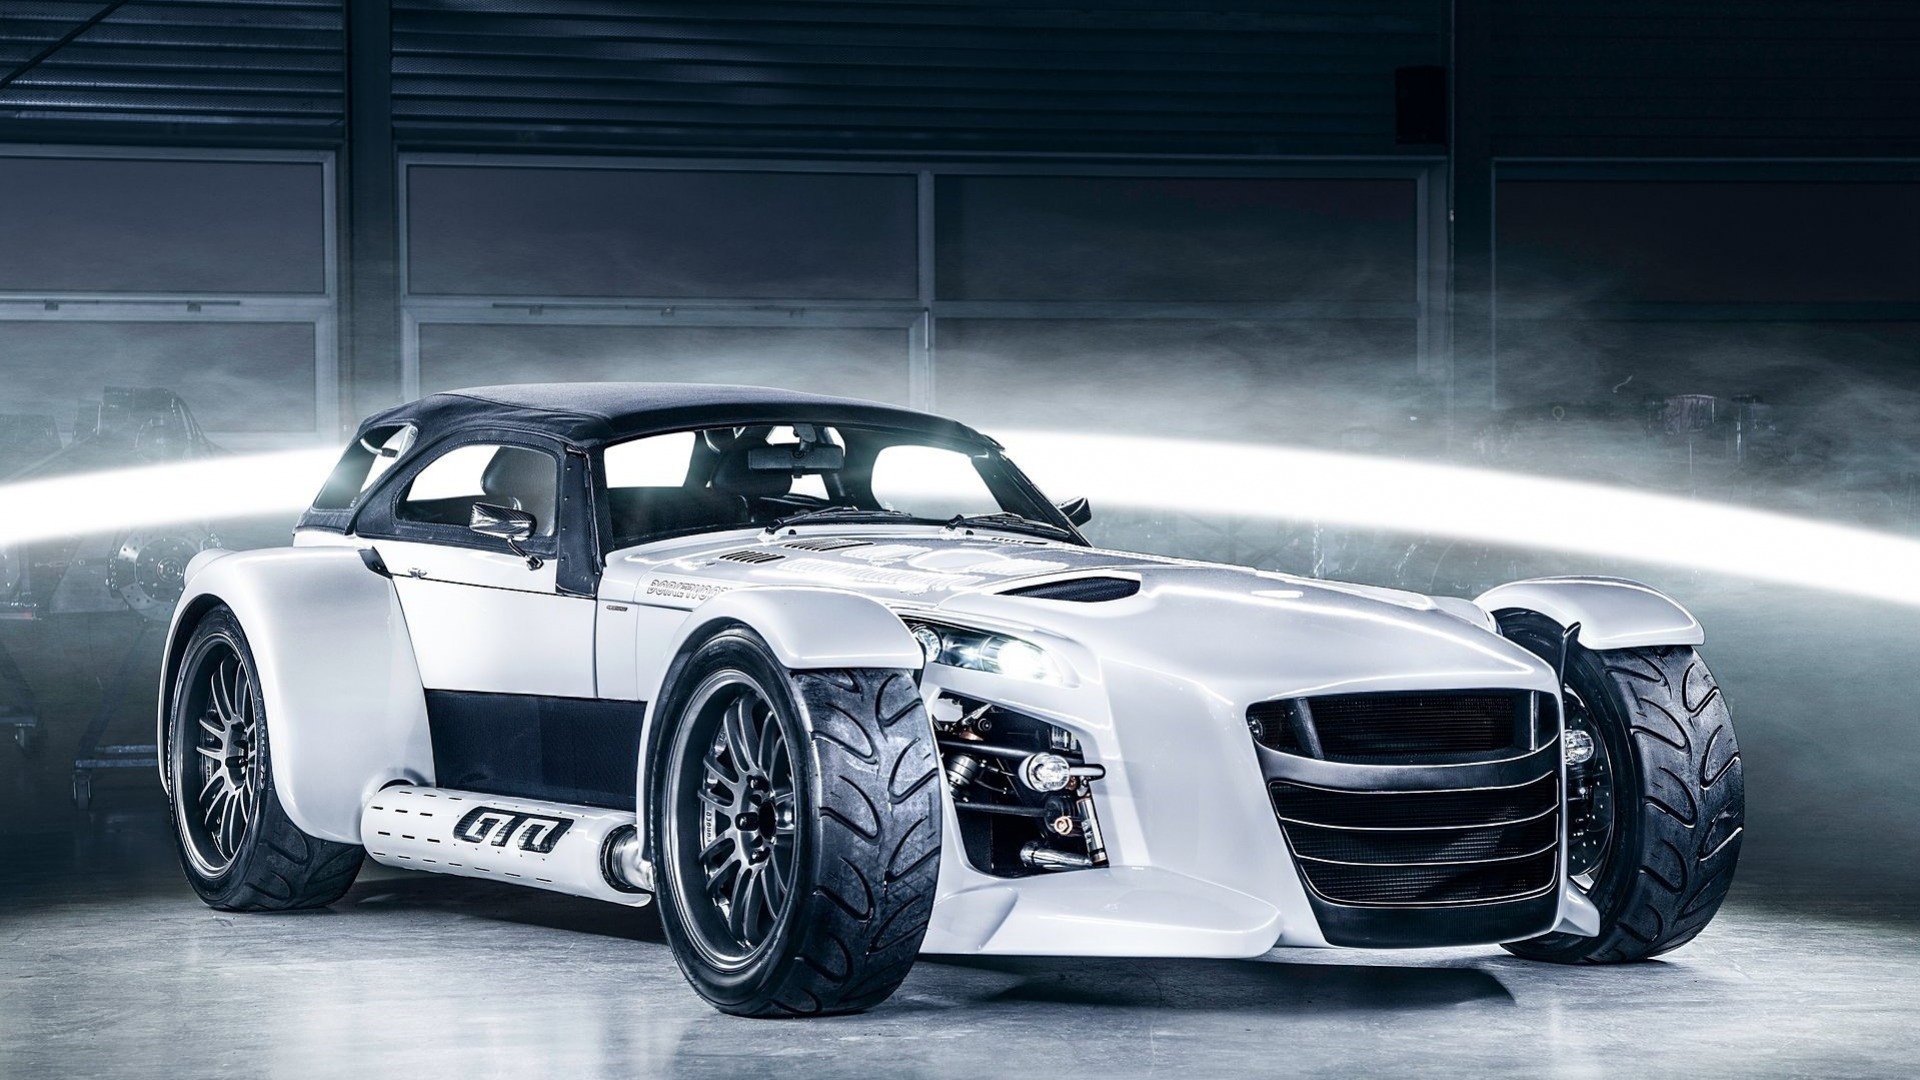 Donkervoort D8 Gto Sport Car White Car 1920x1080